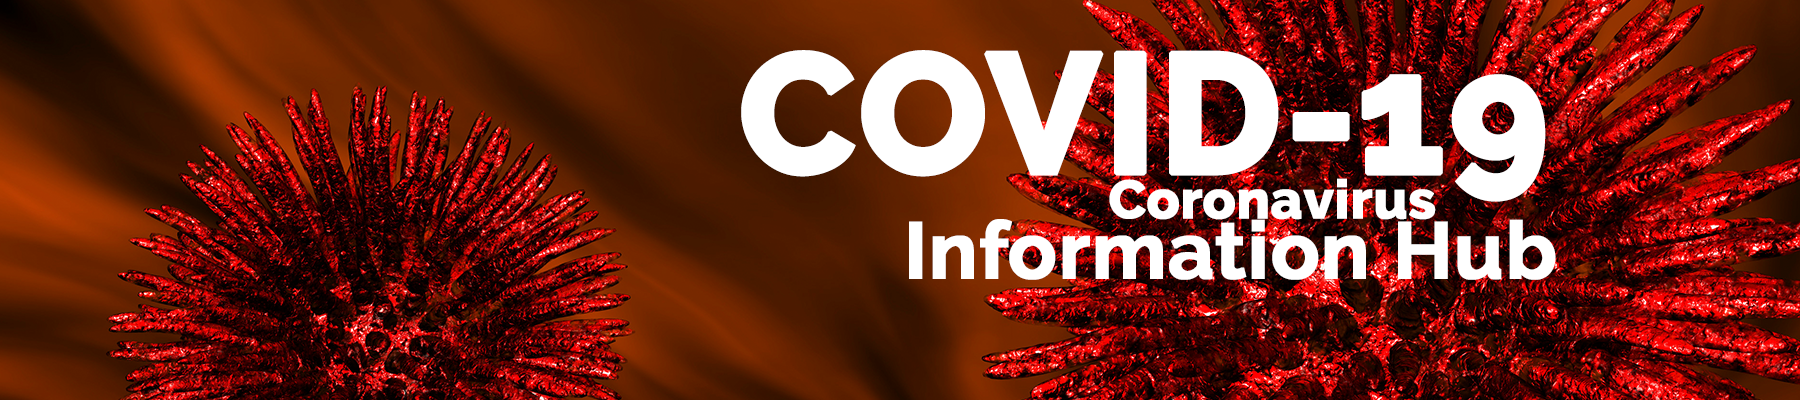 Business Information During COVID-19 Crisis